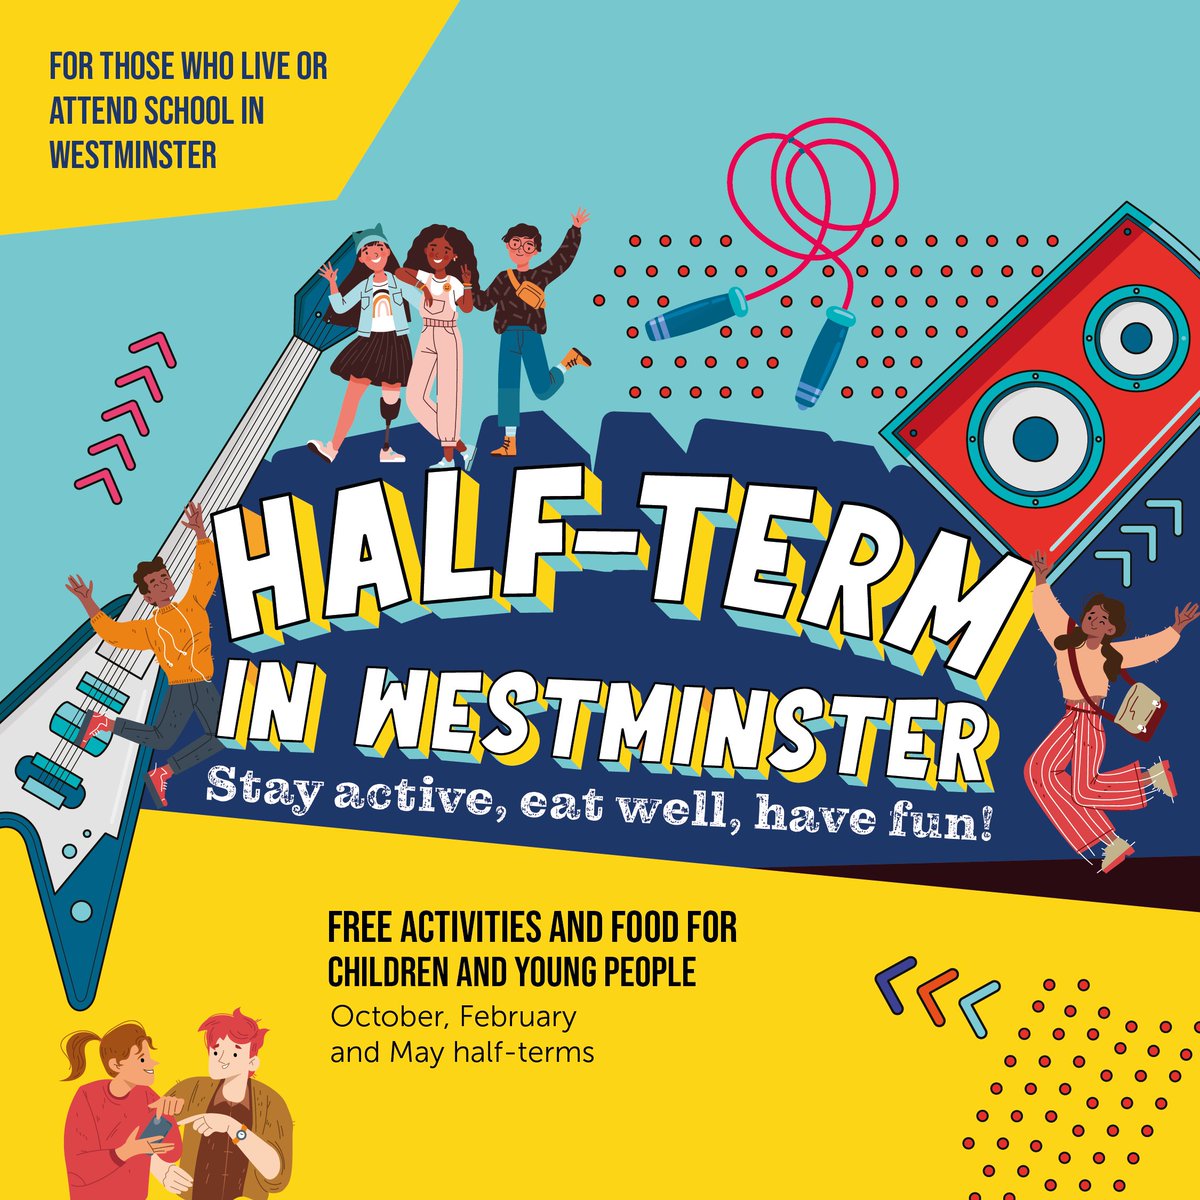 Ready for an exciting half-term in Westminster? Free activities and food for children and young people! Sports, music, dance, arts & crafts - everything can be found on ourcity.org.uk/westminster-ha…😆🍂 #OurCity